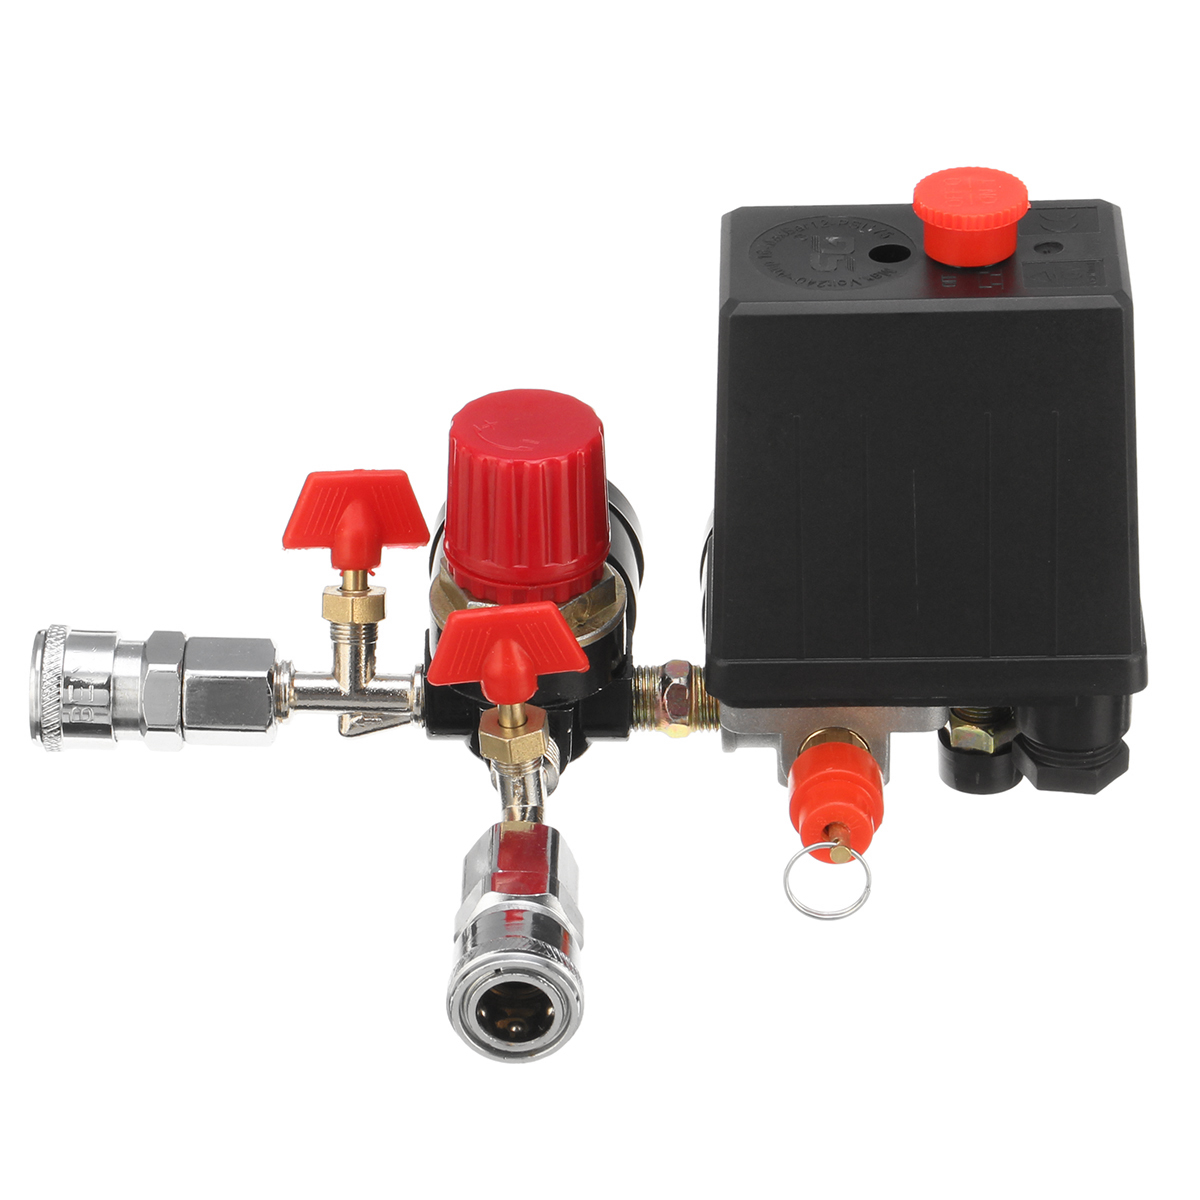 Air Compressor Pressure Switch Control Valve Manifold Relief Regulator Gauge with Quick Connector